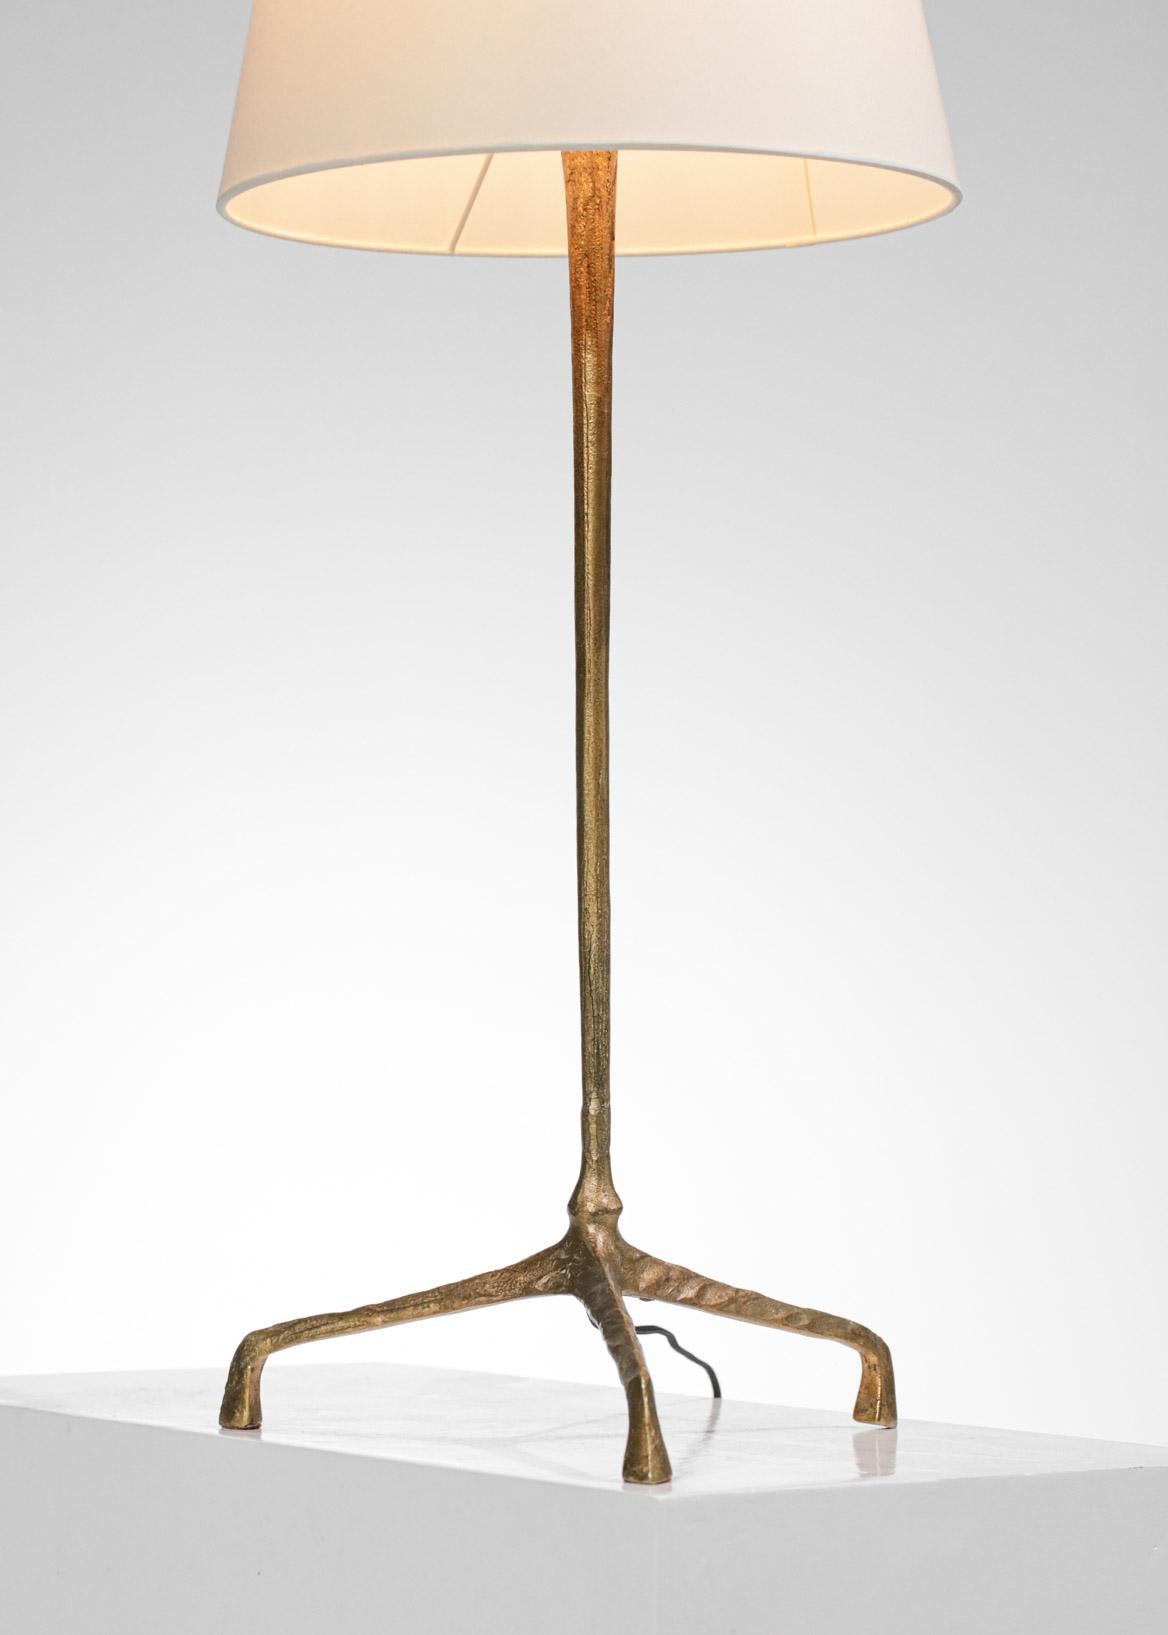 French Large Table Lamp by Felix Agostini in Gilded Bronze 50's - F423 1